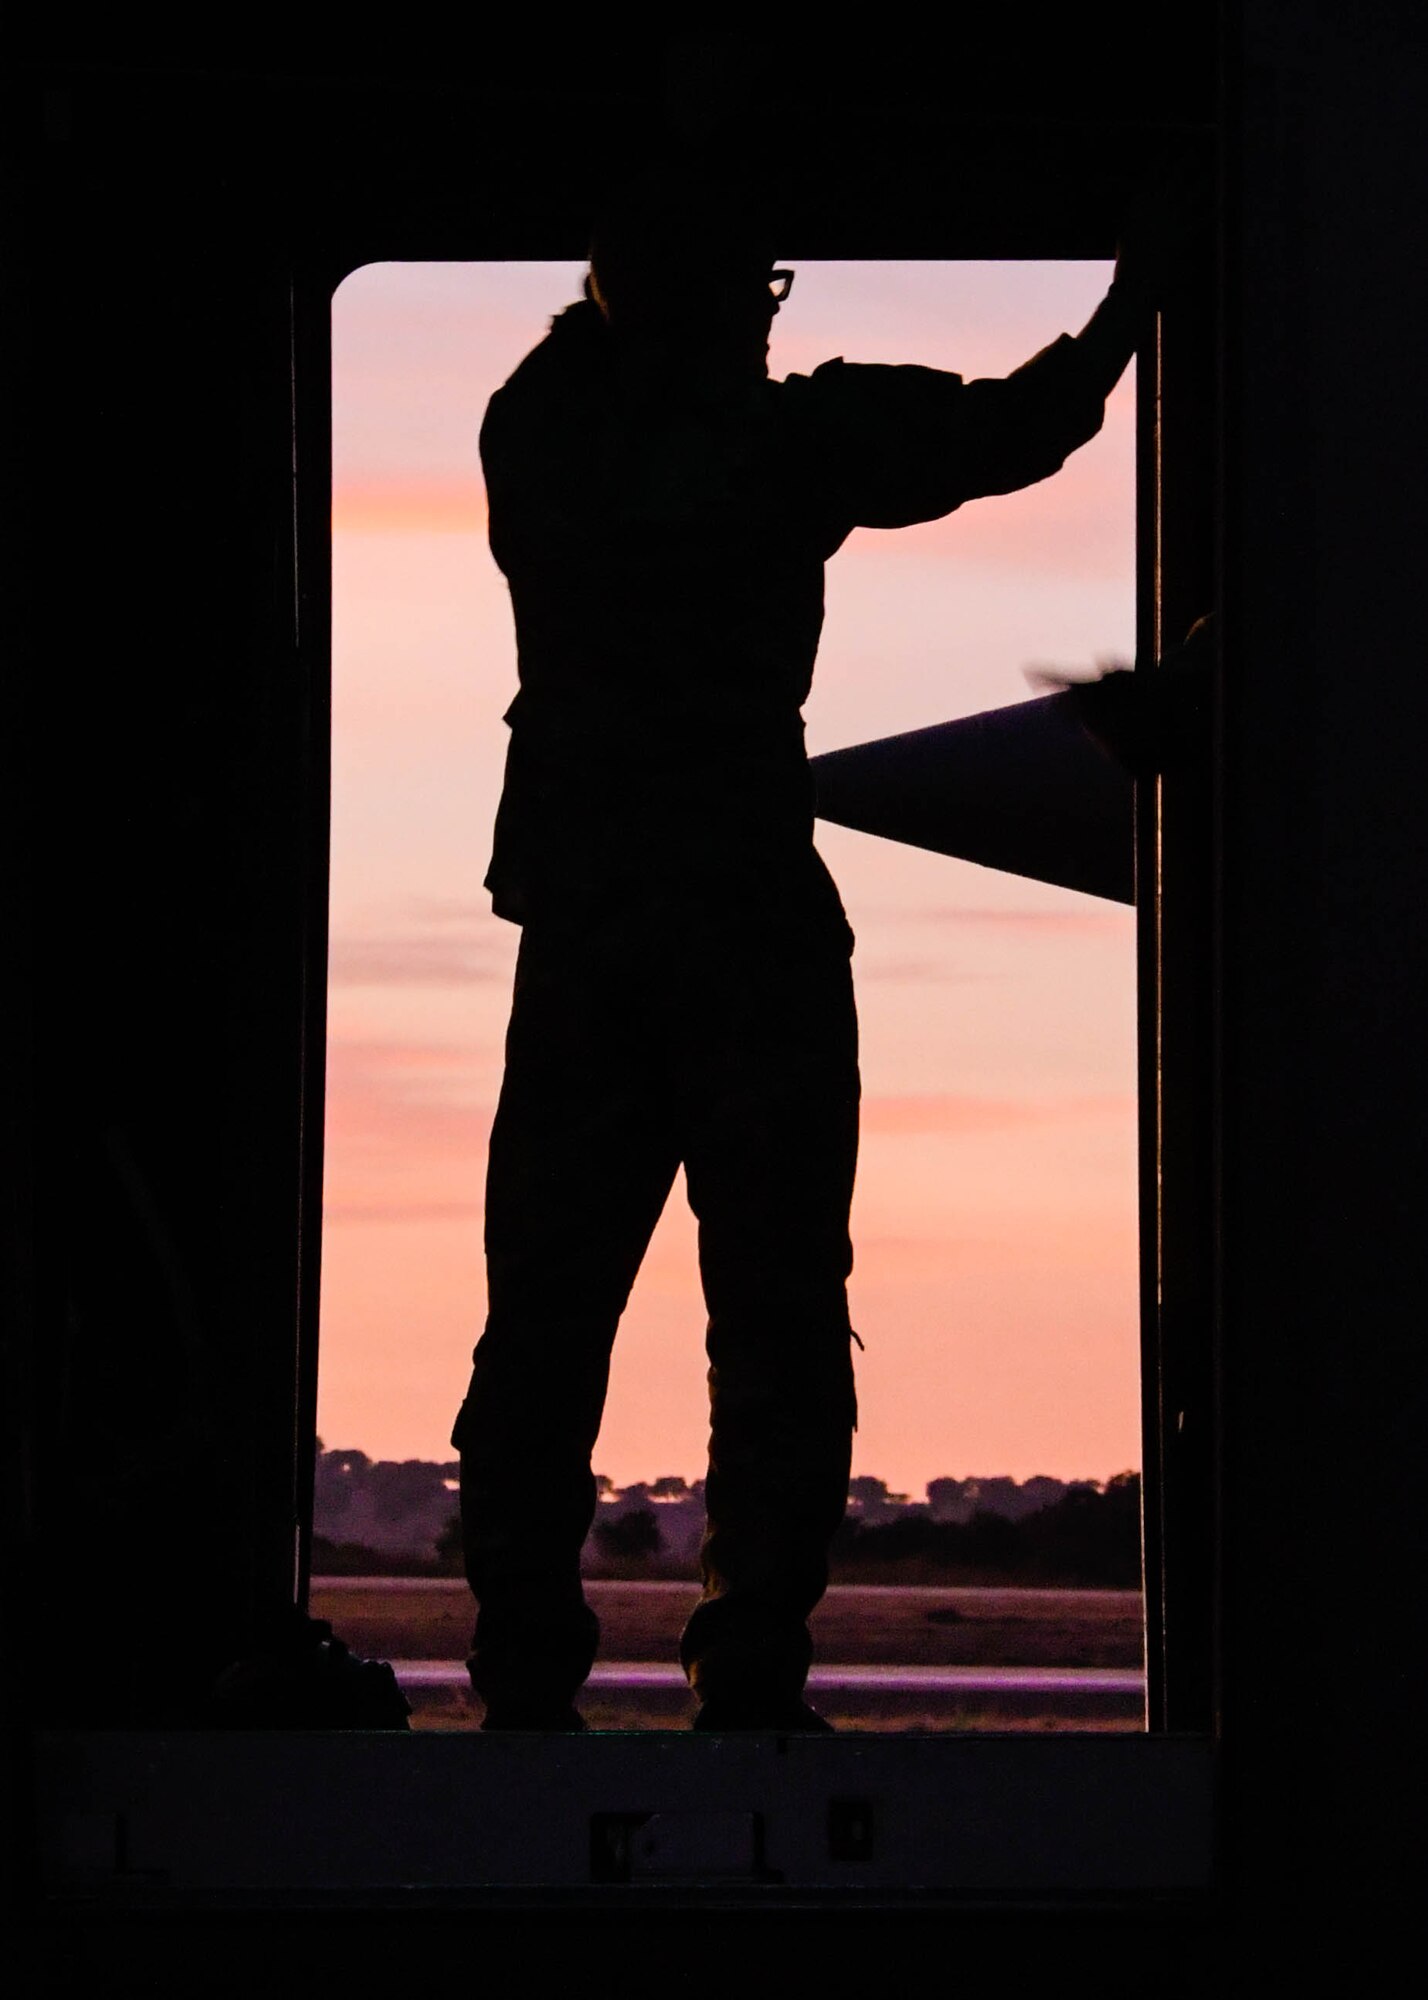 Staff Sgt. Tyler Thomas, a 700th Airlift Squadron loadmaster, surveys the landscape from an open C-130H3 paratroop door during Exercise Real Thaw 2019 at Beja Air Base, Portugal, Oct. 2, 2019. Real Thaw is a Portuguese-led large joint and combined force exercise held annually where Dobbins provided aerial support. (U.S. Air Force photo/Senior Airman Josh Kincaid)